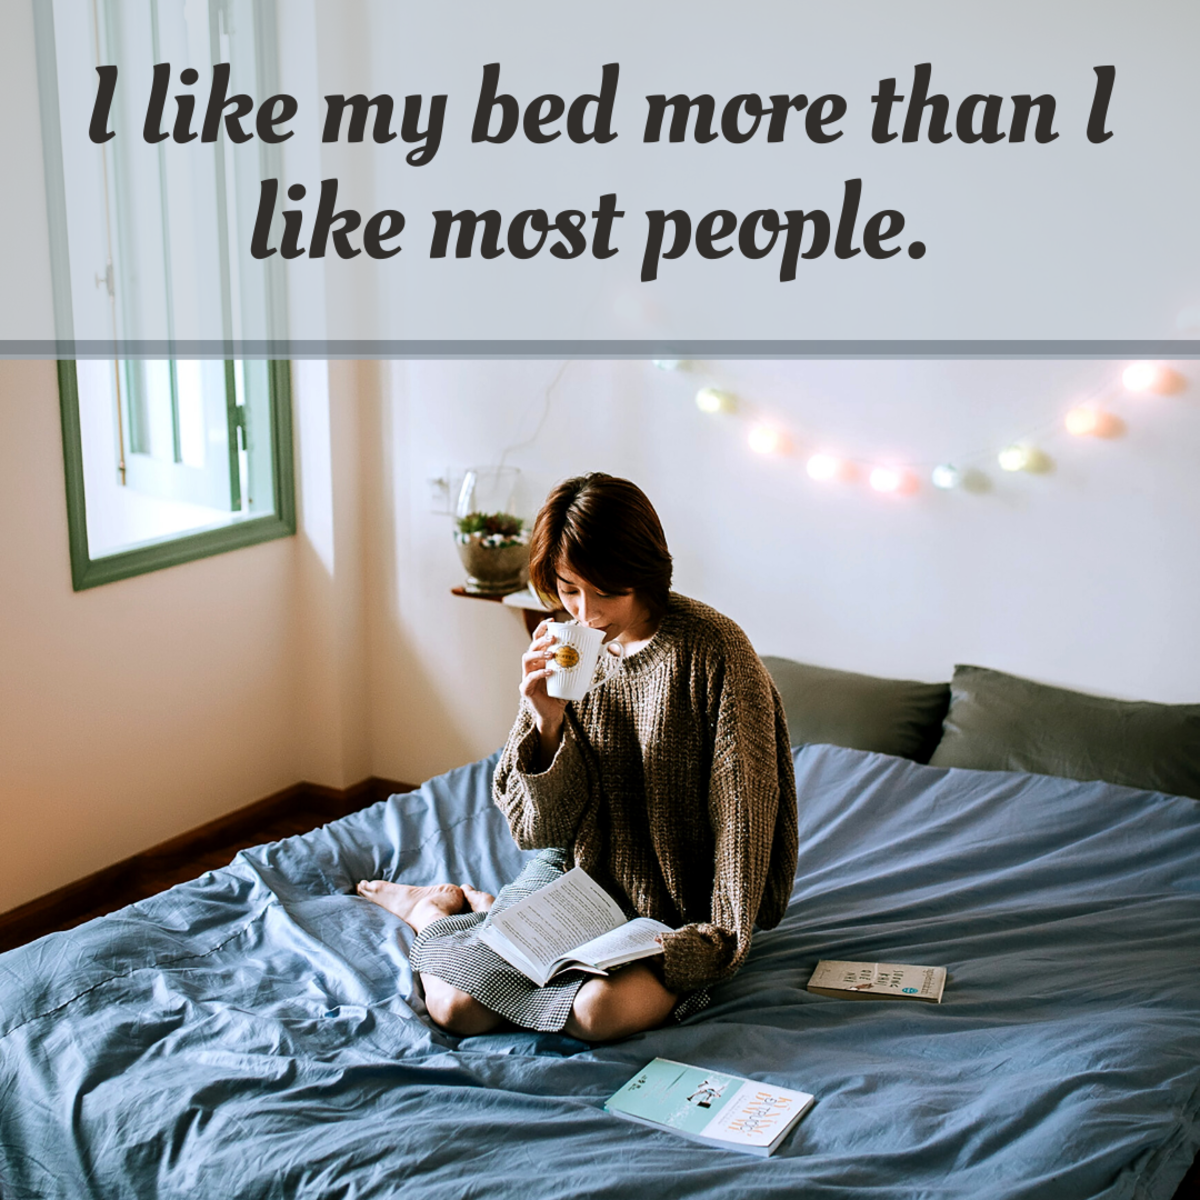 Cute, Funny 'About Me' Quotes and Facebook Status Updates About Yourself -  TurboFuture